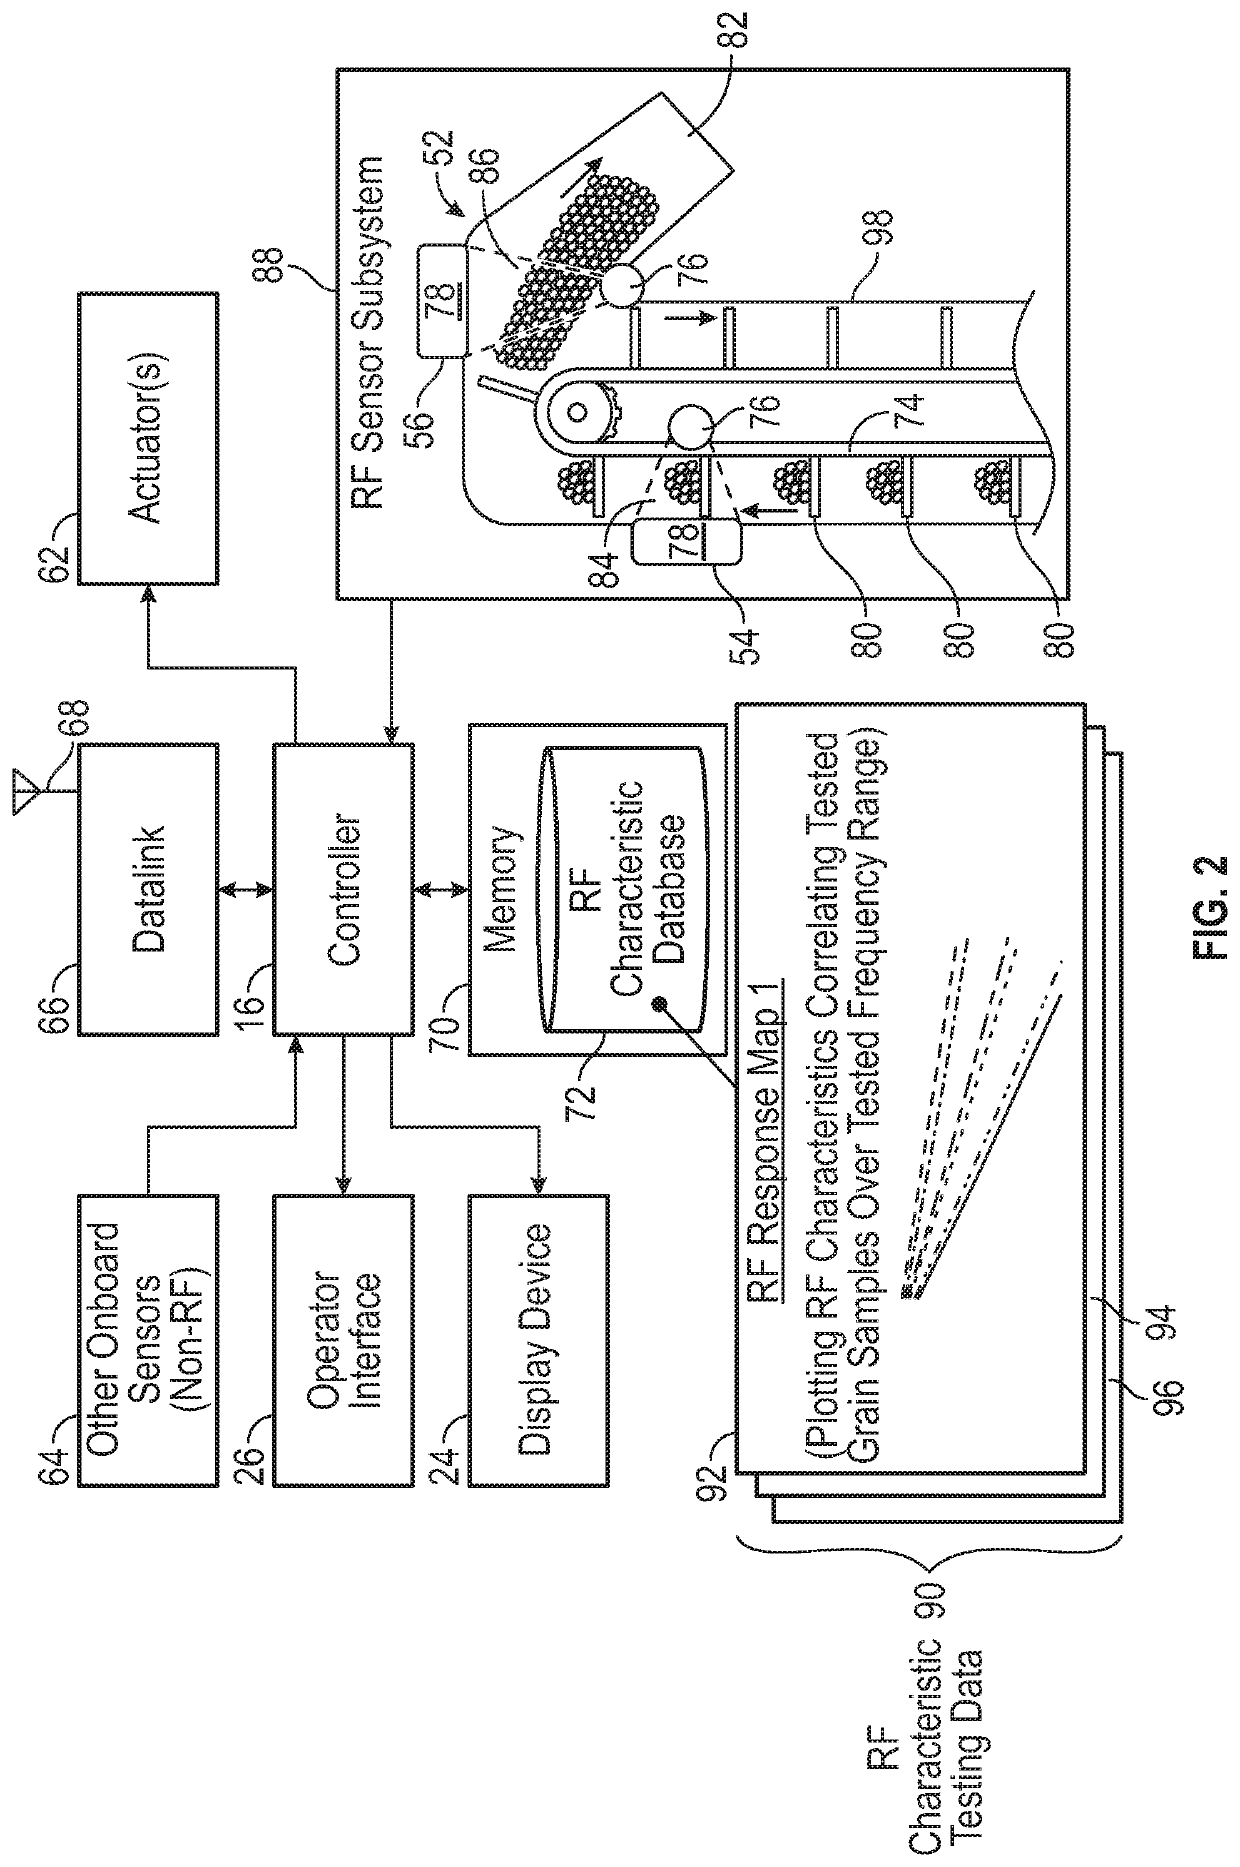 Radio frequency grain mass and constituent measurement systems for combine harvesters